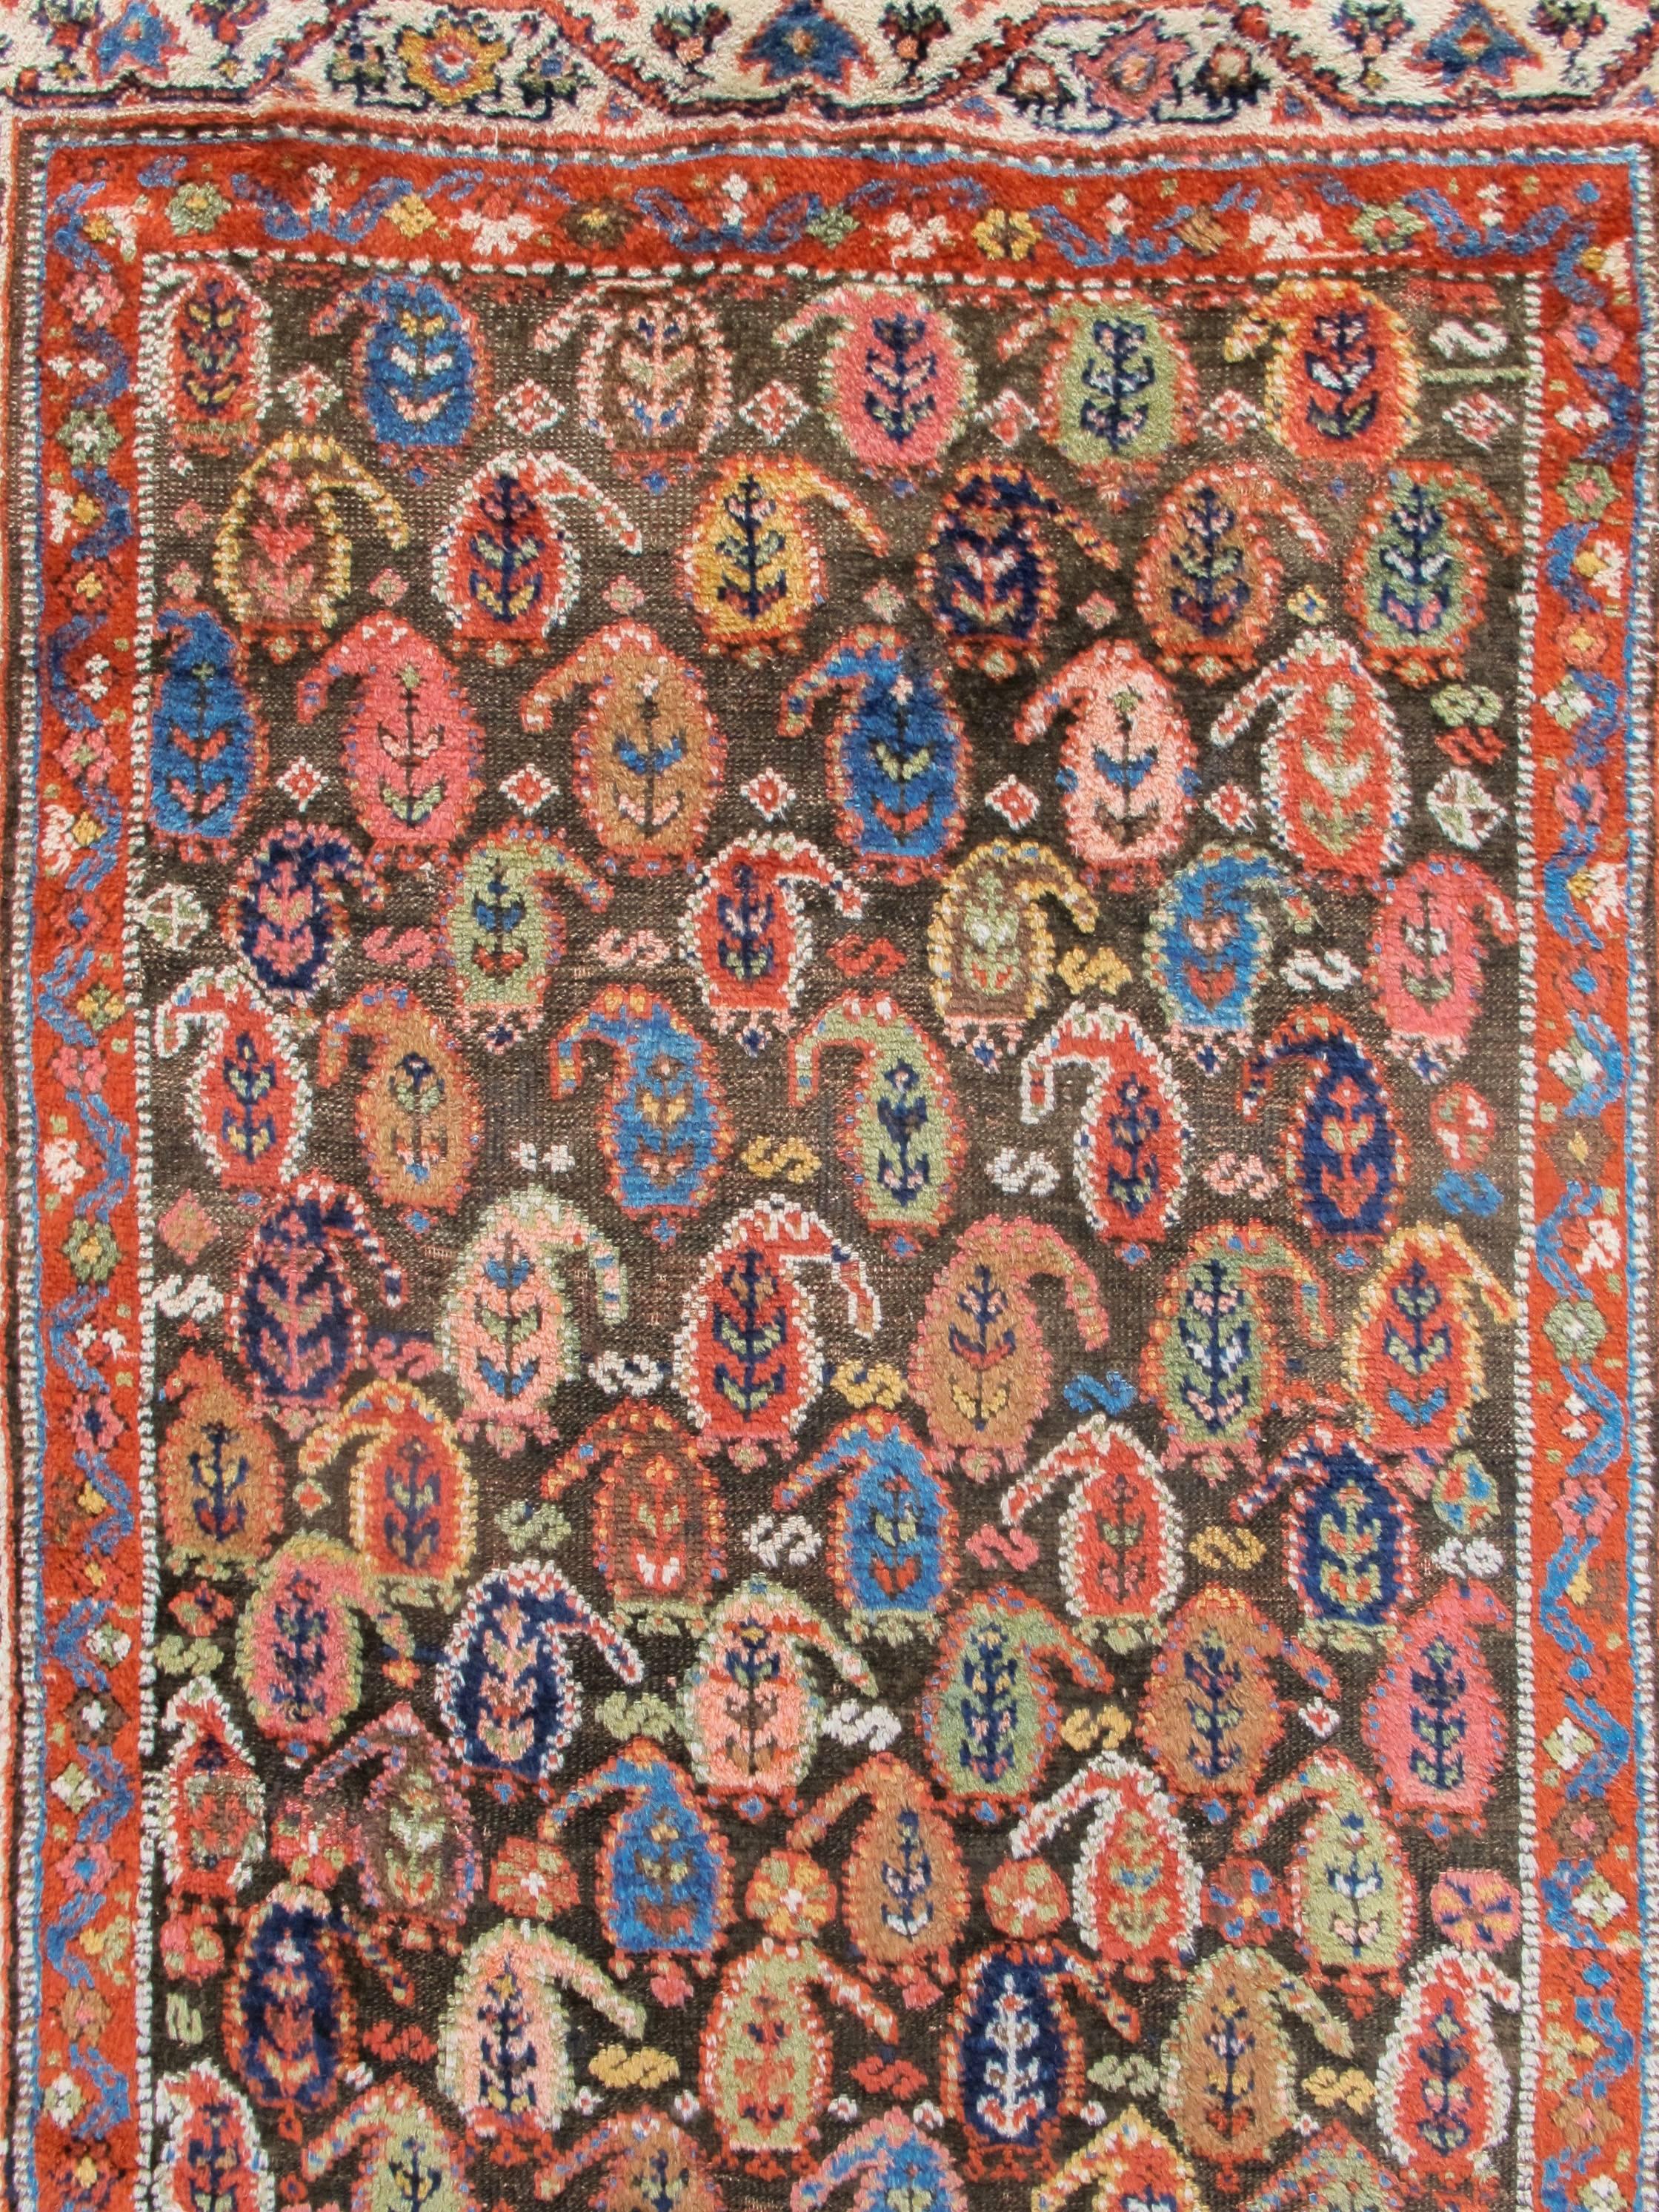 Rows of colorful 'boteh' paisley glisten against the deep chocolate ground of this Kurdish rug from Northwest Persia. Though refined and elegantly drawn, there is a definite sense of energy at work throughout the field as small variations in size,